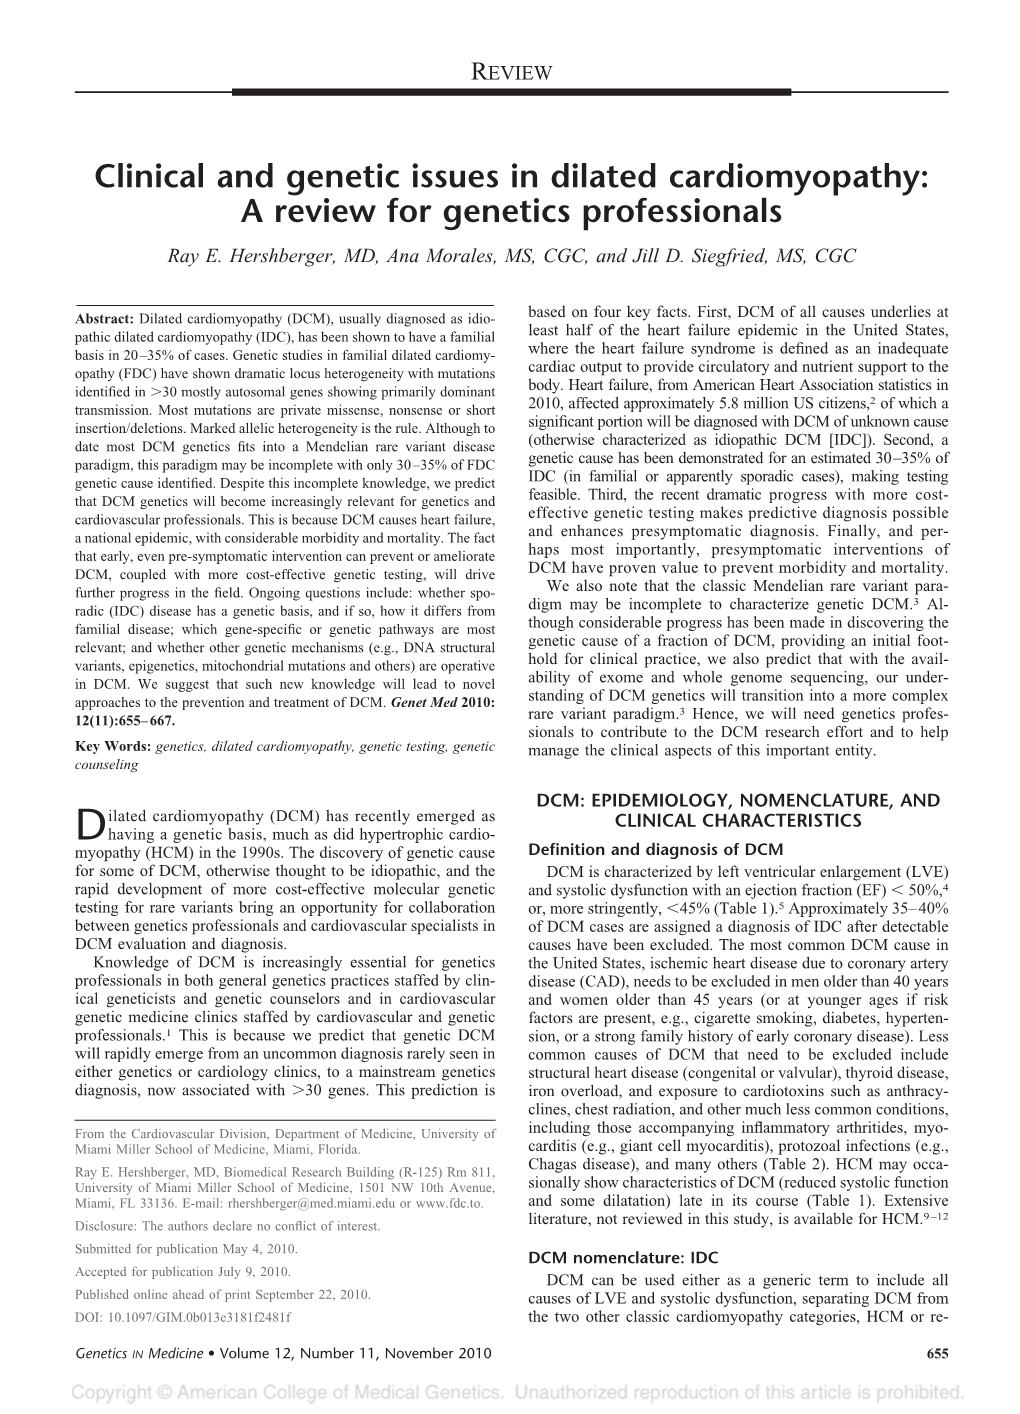 Clinical and Genetic Issues in Dilated Cardiomyopathy: a Review for Genetics Professionals Ray E